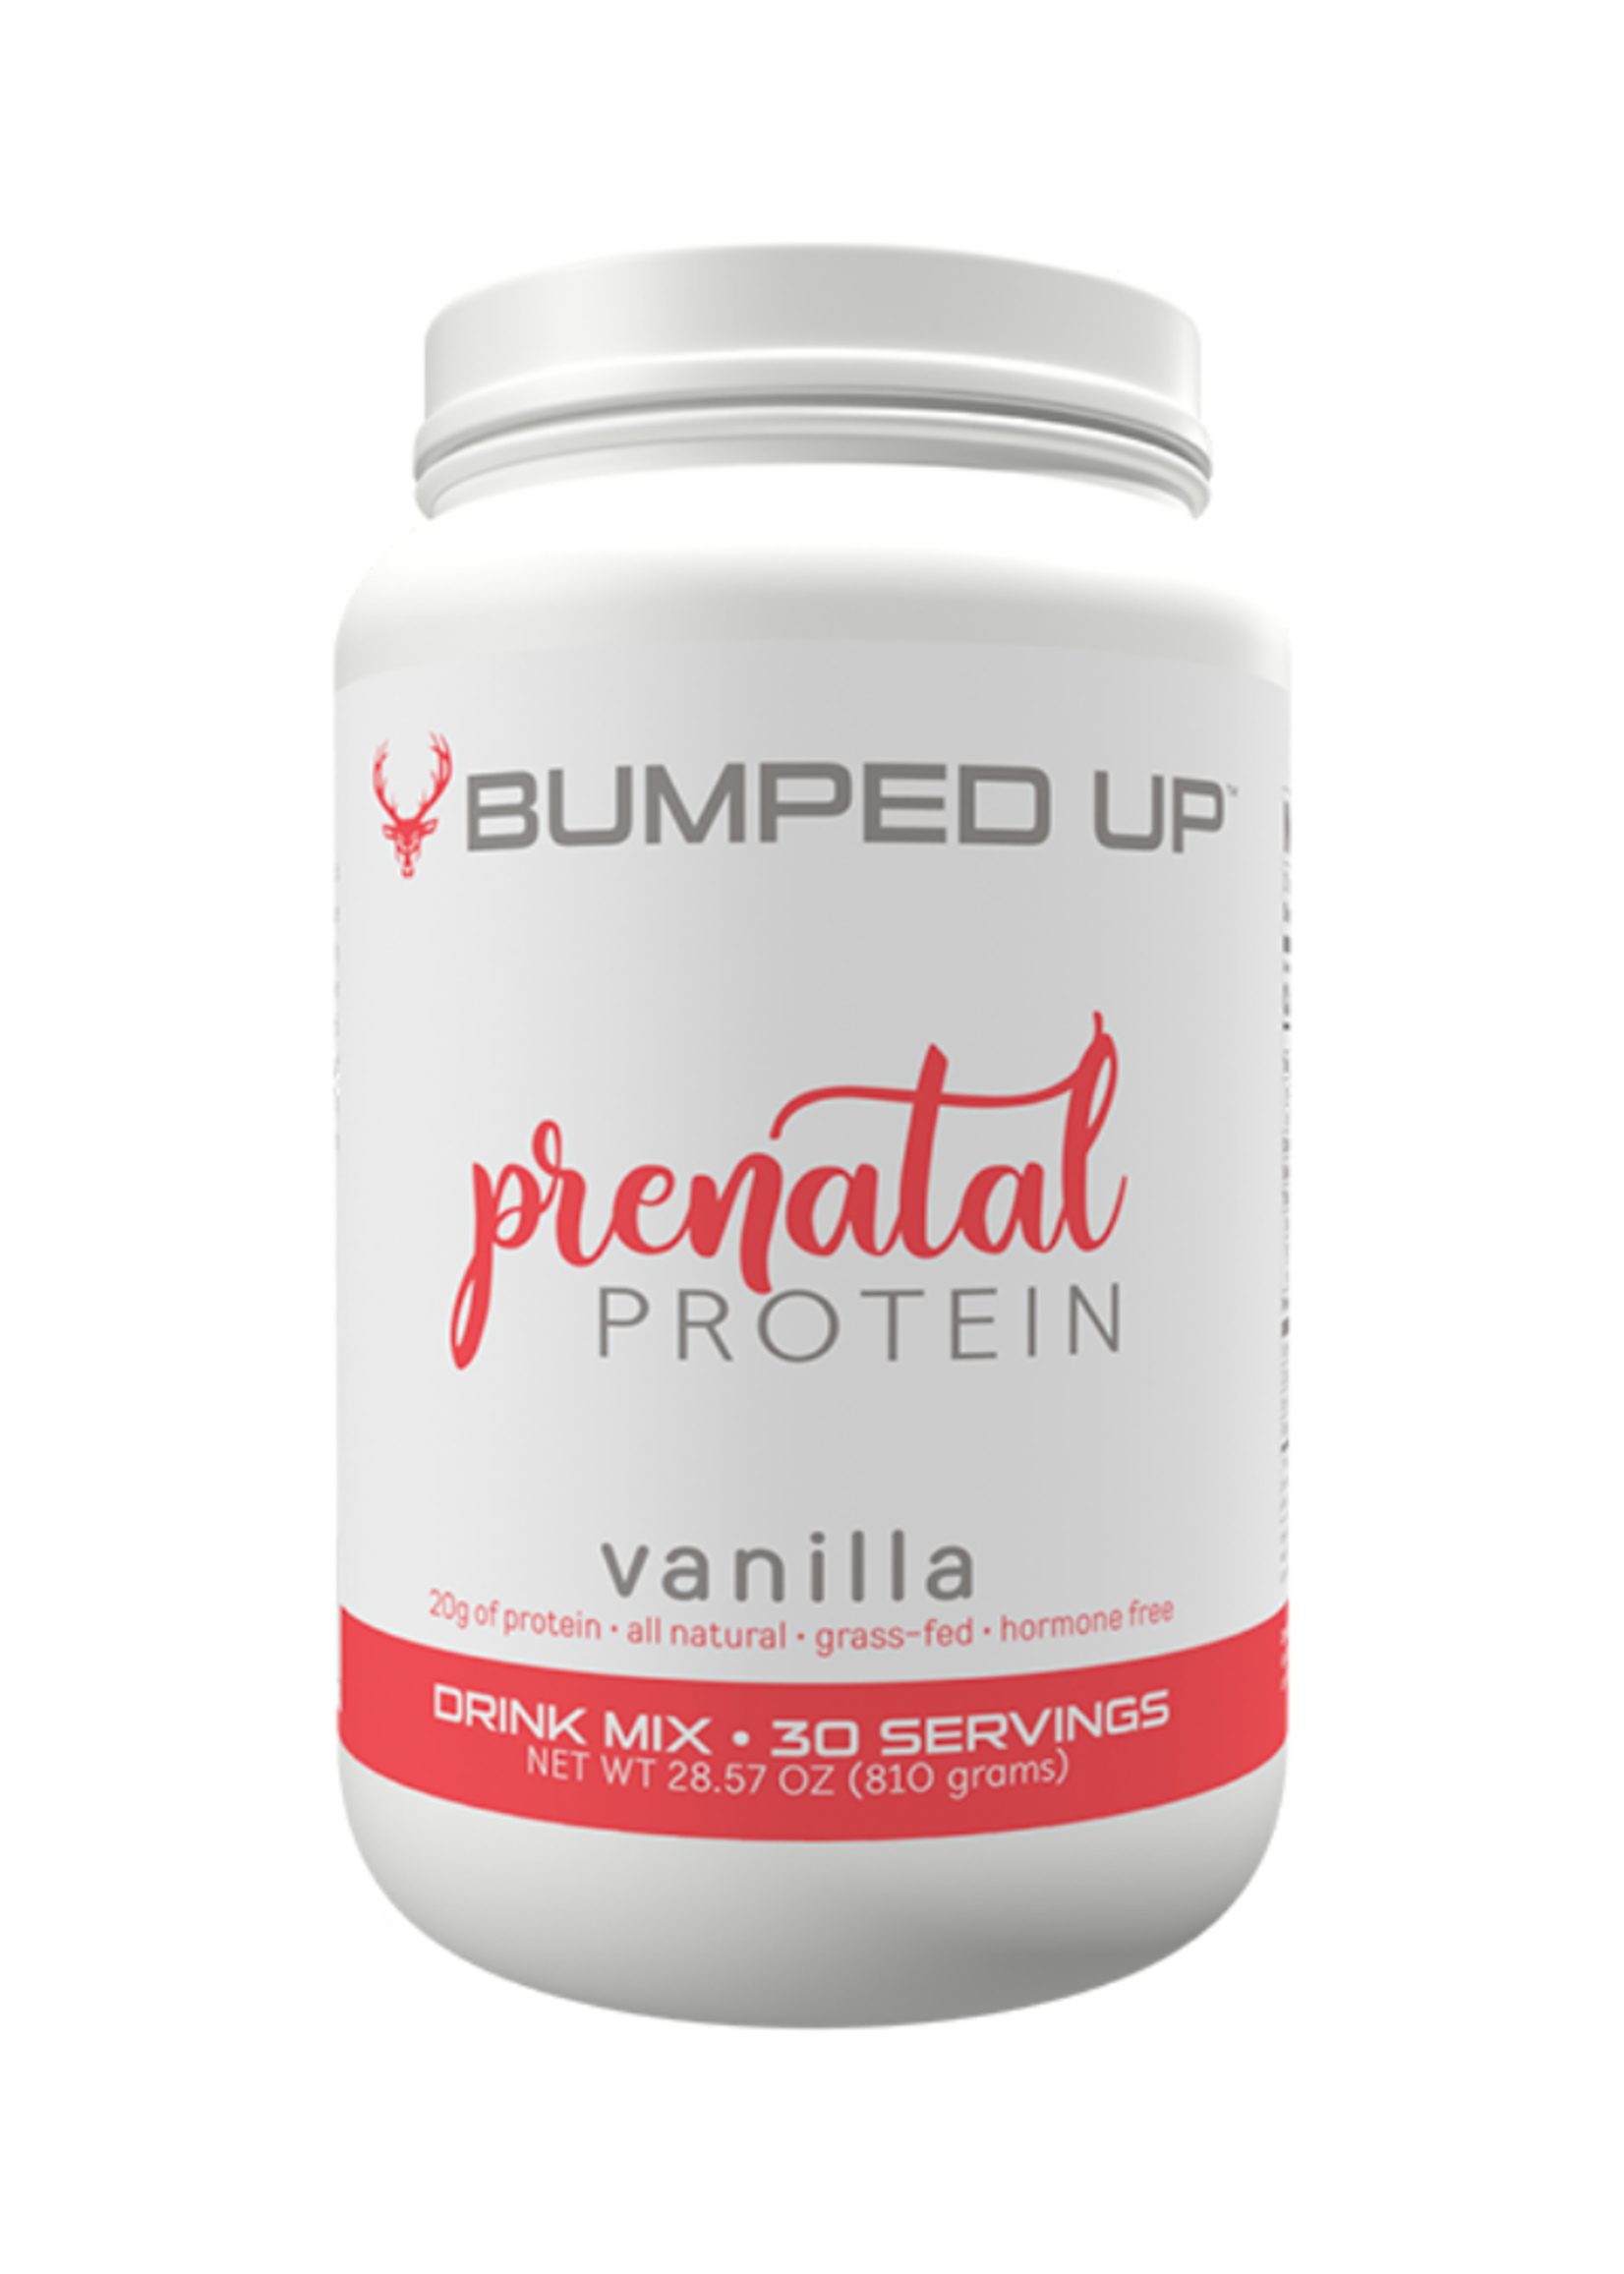 Bucked Up Bumped Up Prenatal Protein